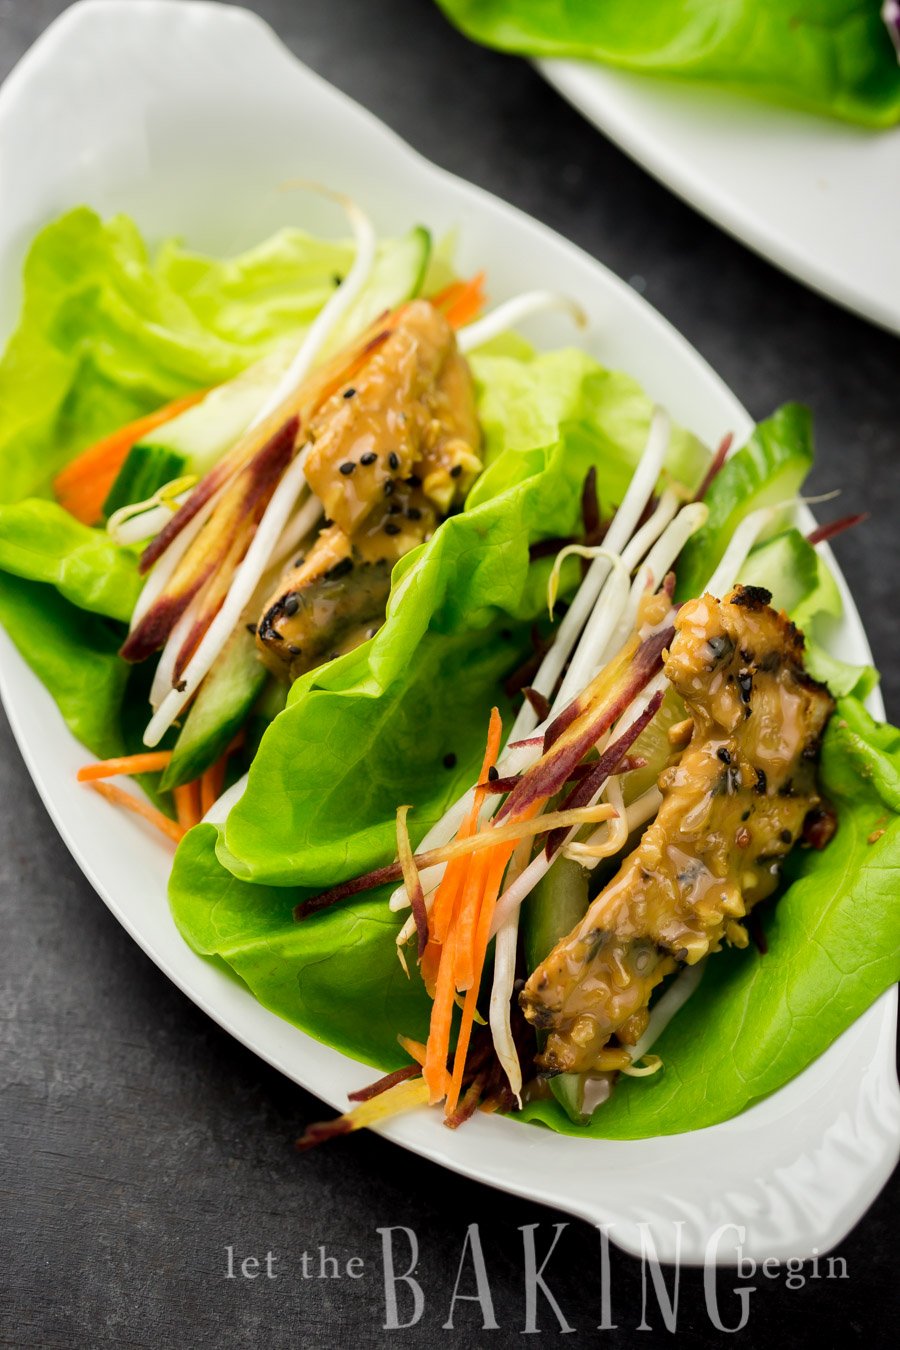 Two lettuce wraps with Thai chicken in peanut sauce on a plate.